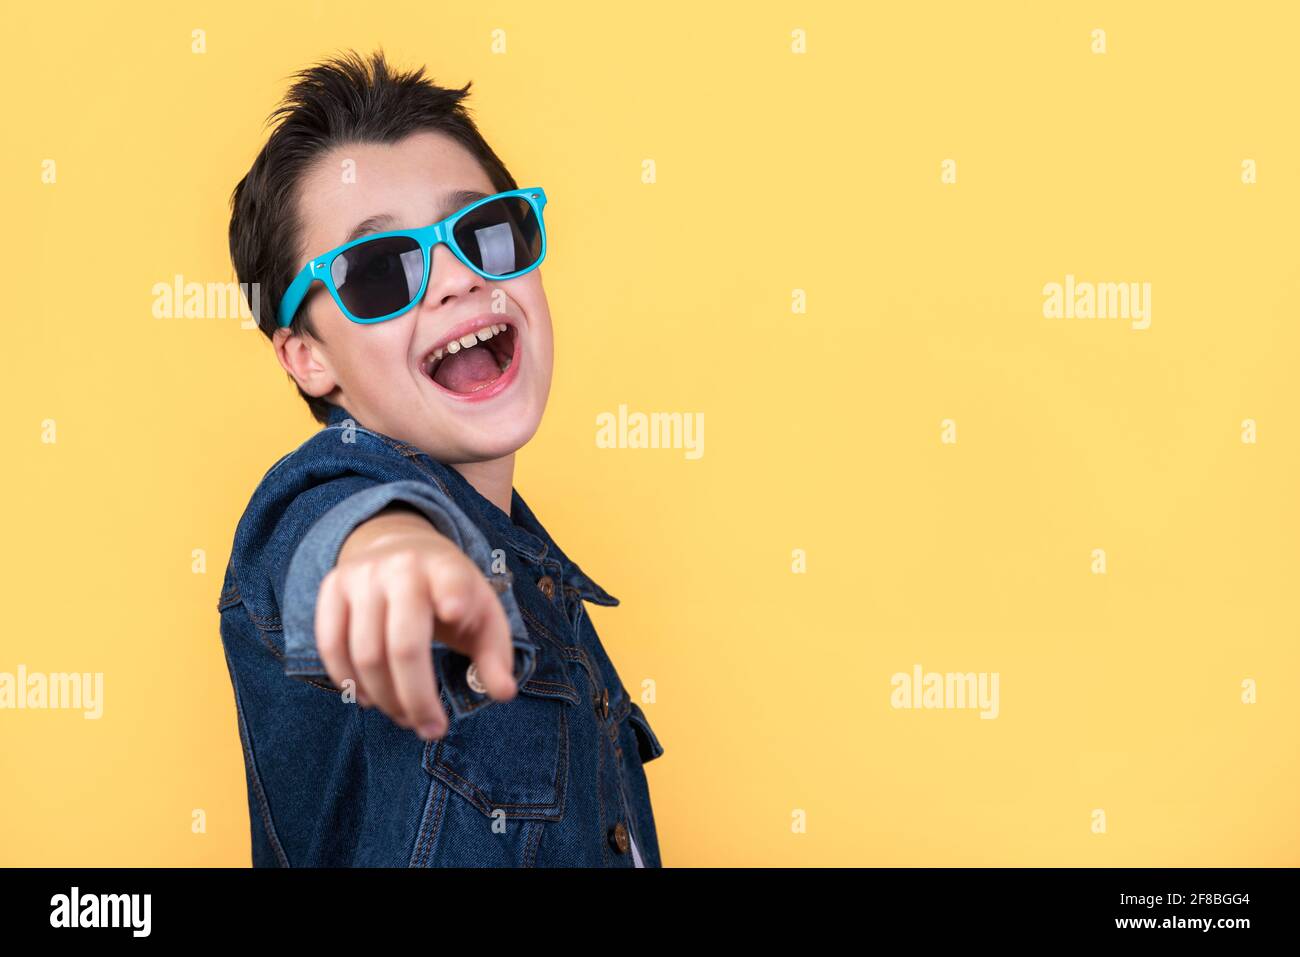 happy and smiling kid with sunglasses pointing with the finger and copy space on a yellow background Stock Photo